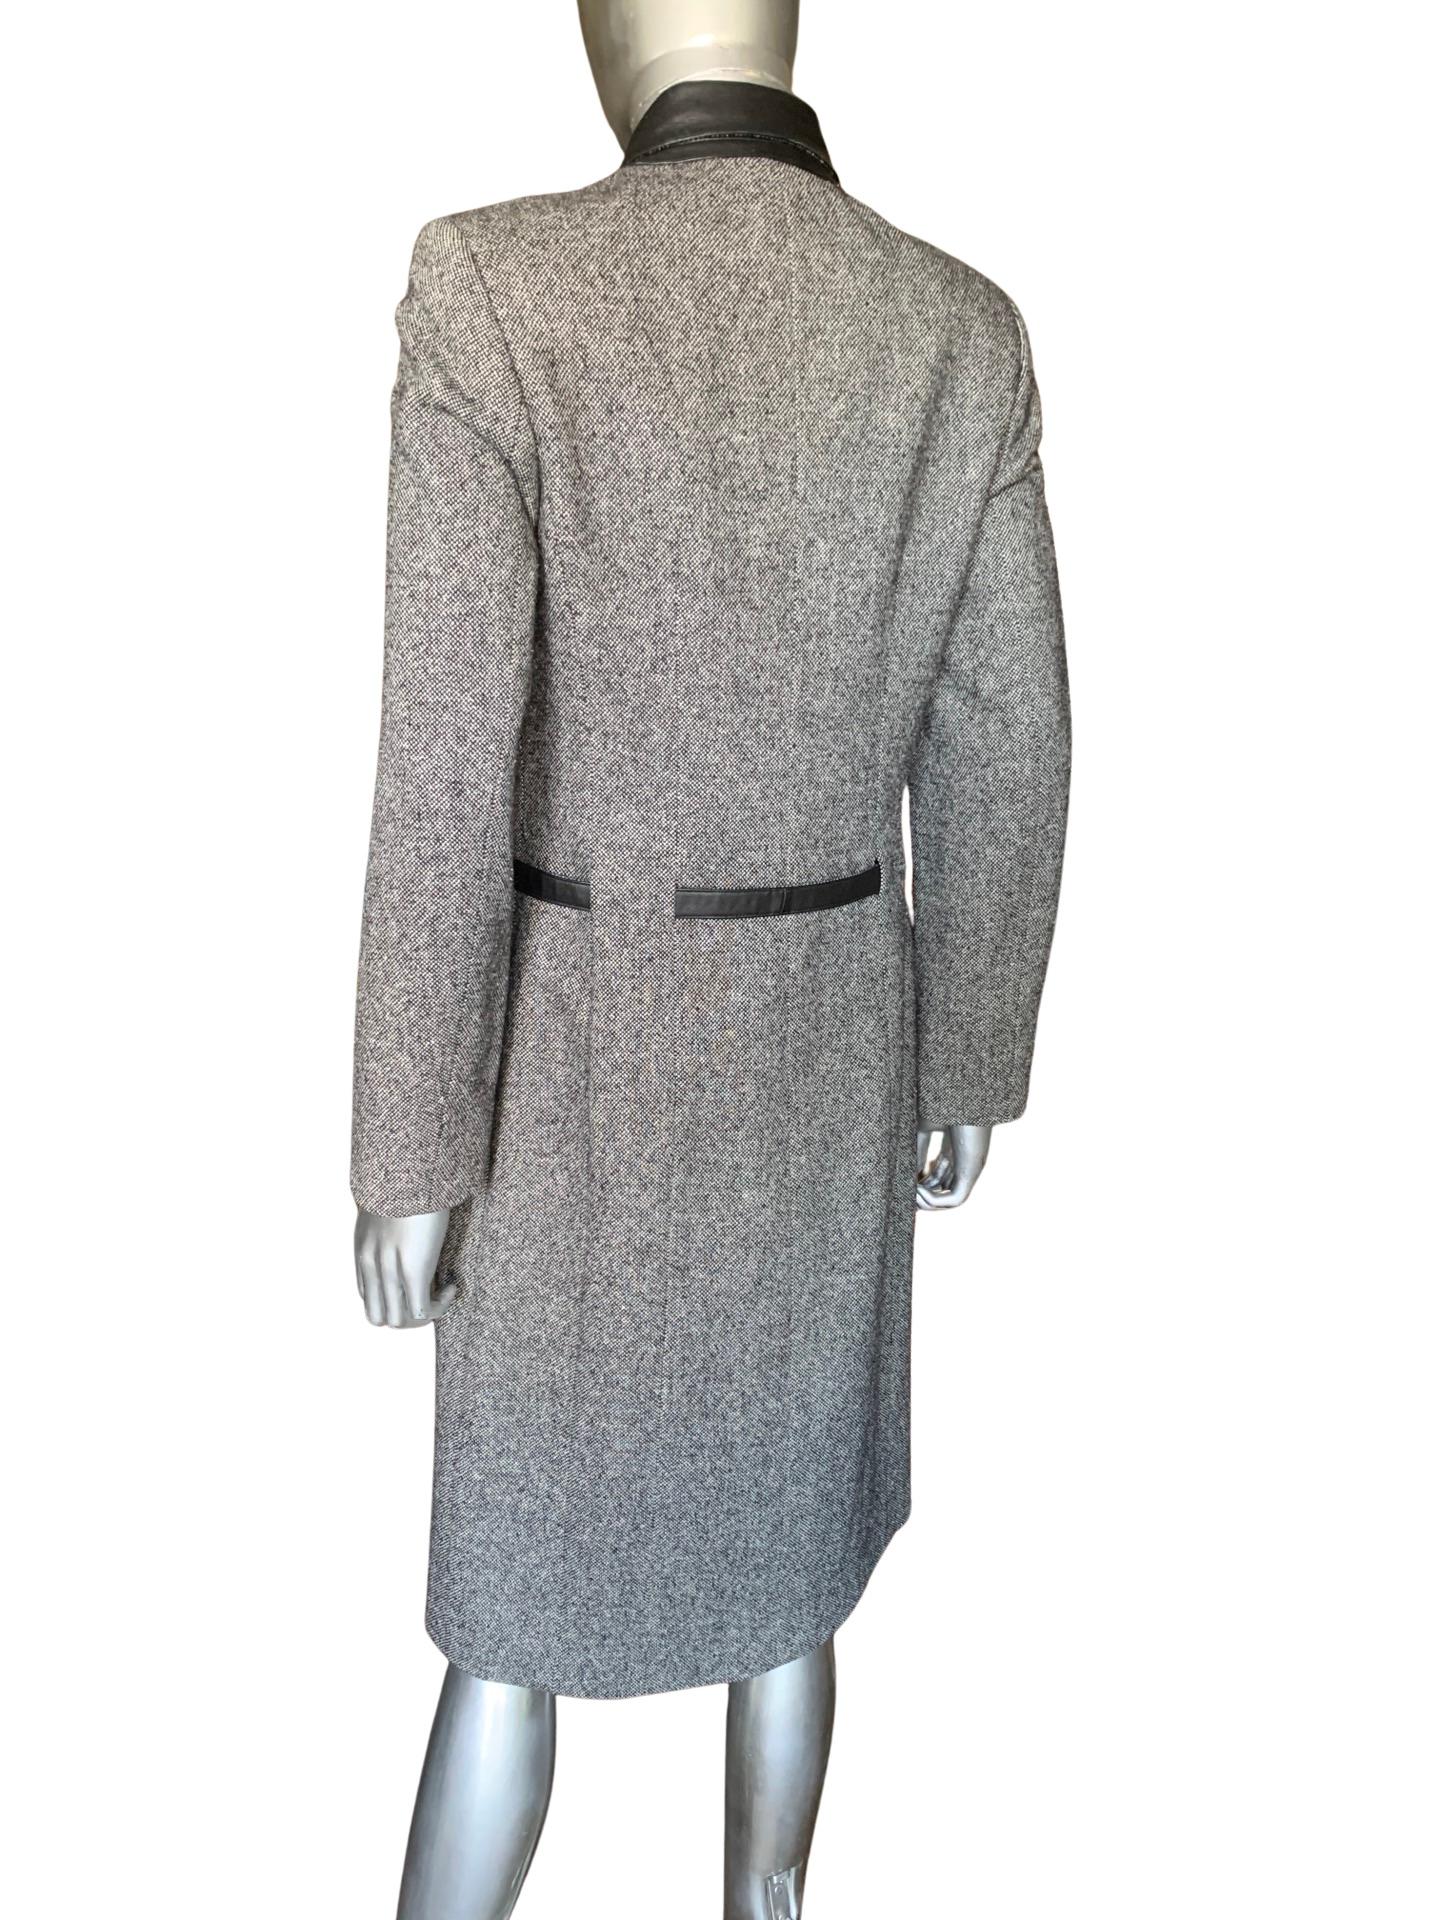 Worth New York Millitary Silk/Wool Coat Dress with Black Leather Trim Size 4 For Sale 2